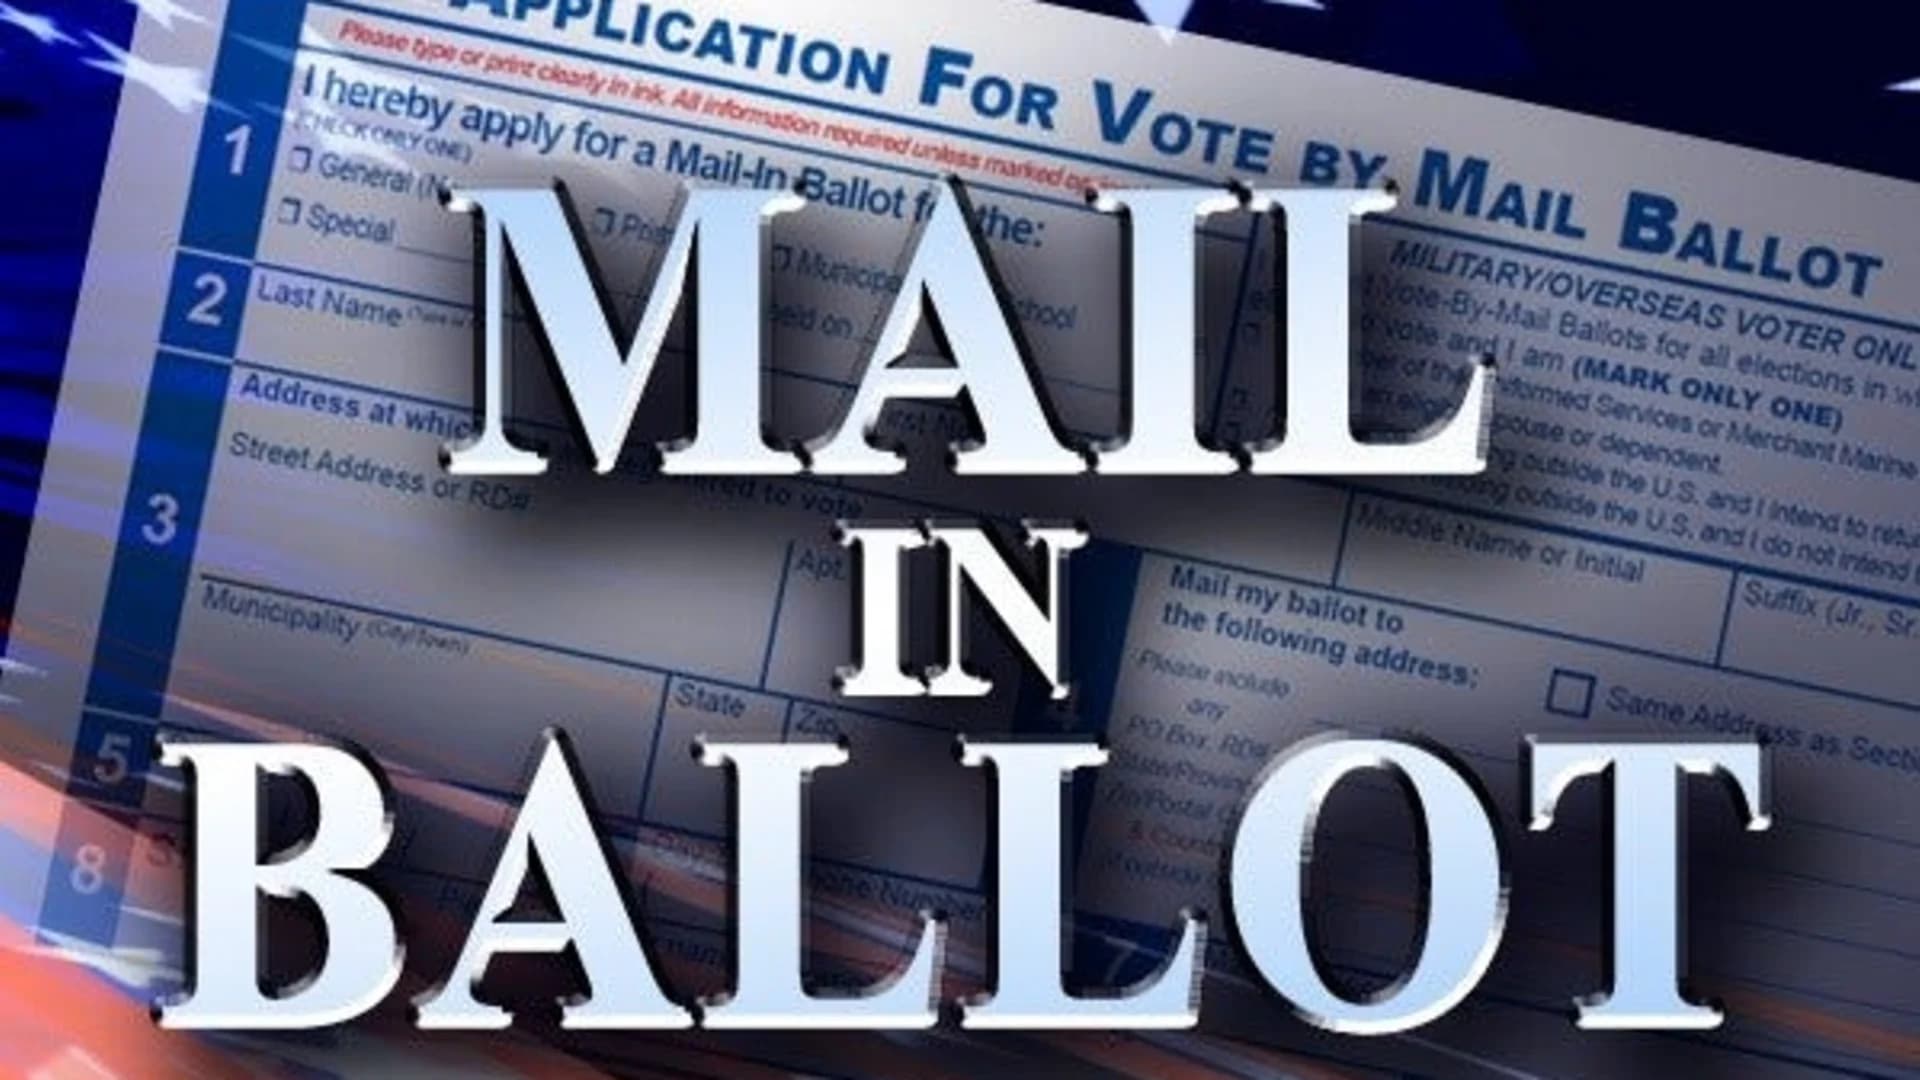 Mail-in ballots in New Jersey county feature wrong zip code